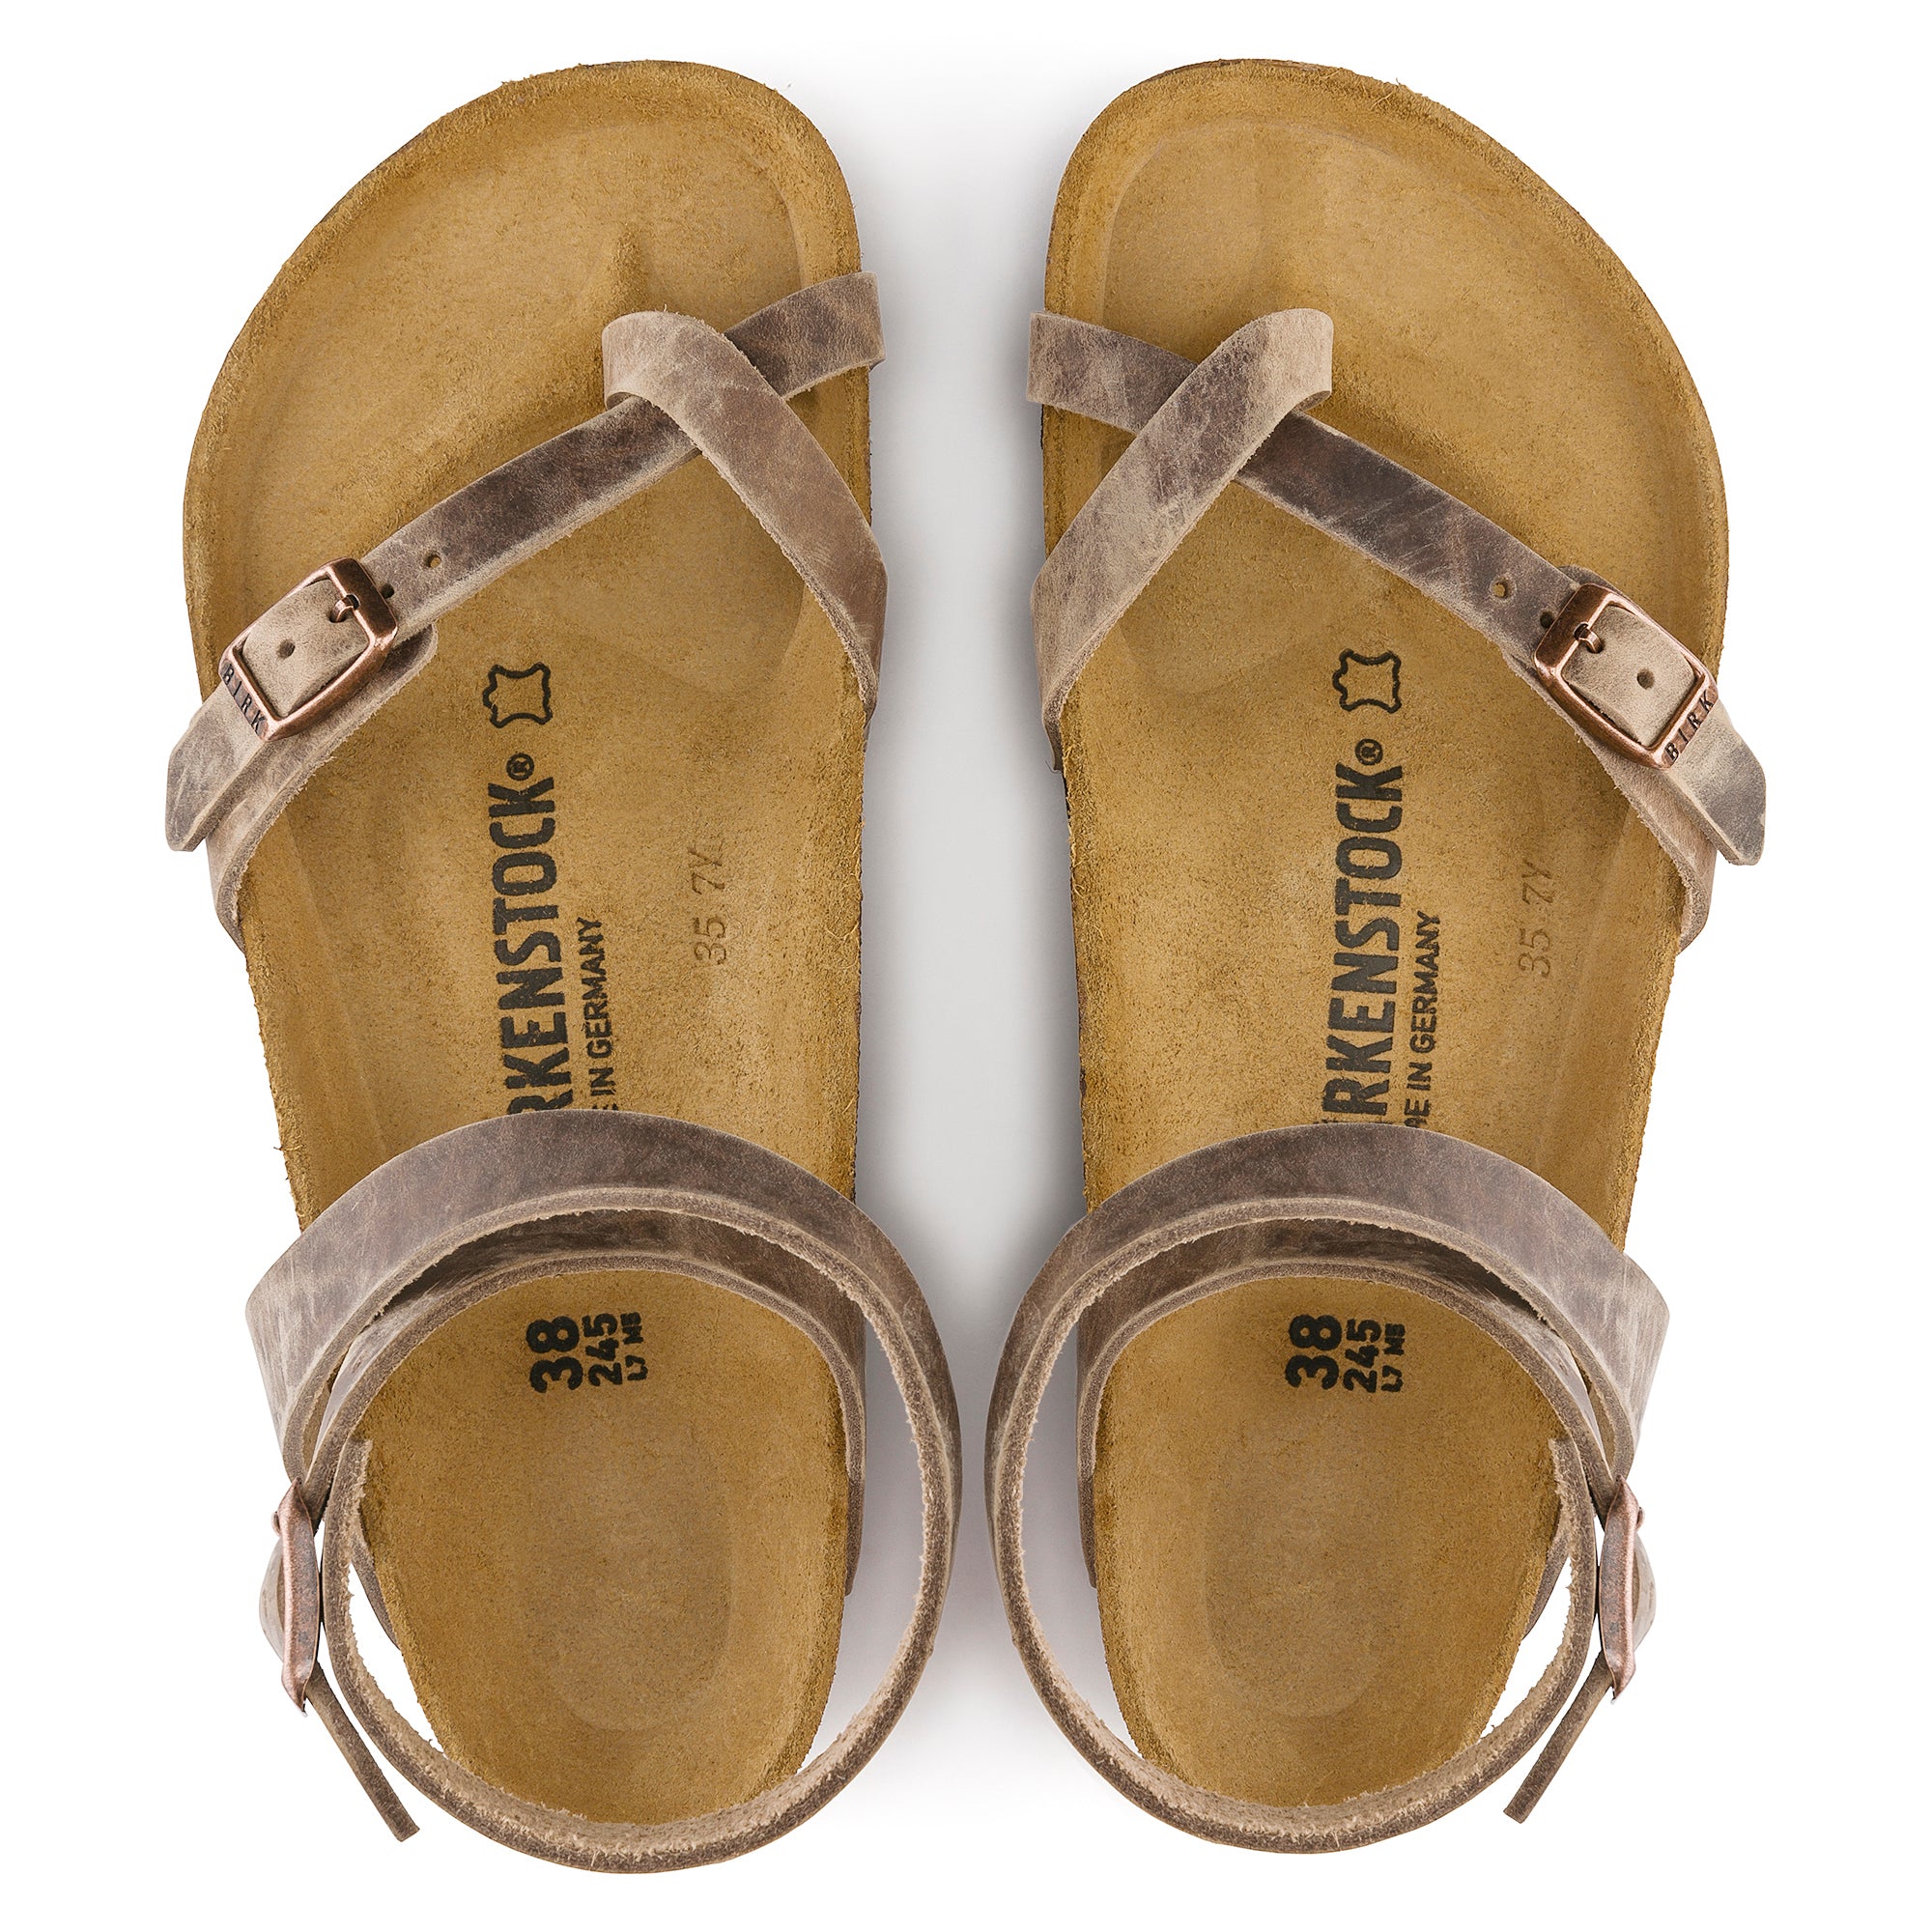 Birkenstock Limited Edition Yara tobacco oiled leather